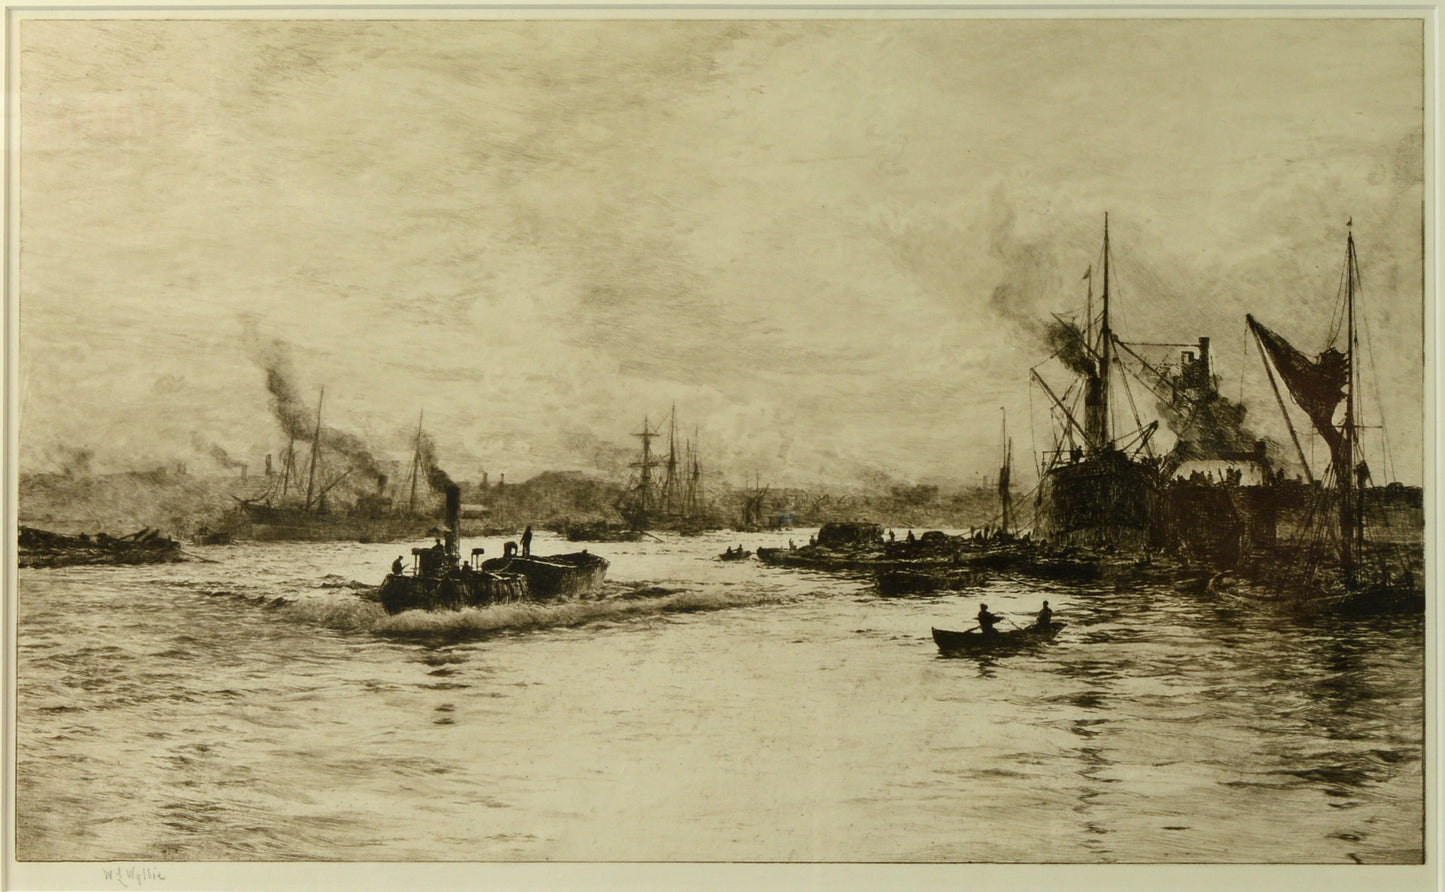 Lower Pool of the Thames, London - Signed Etching by W.L. Wyllie